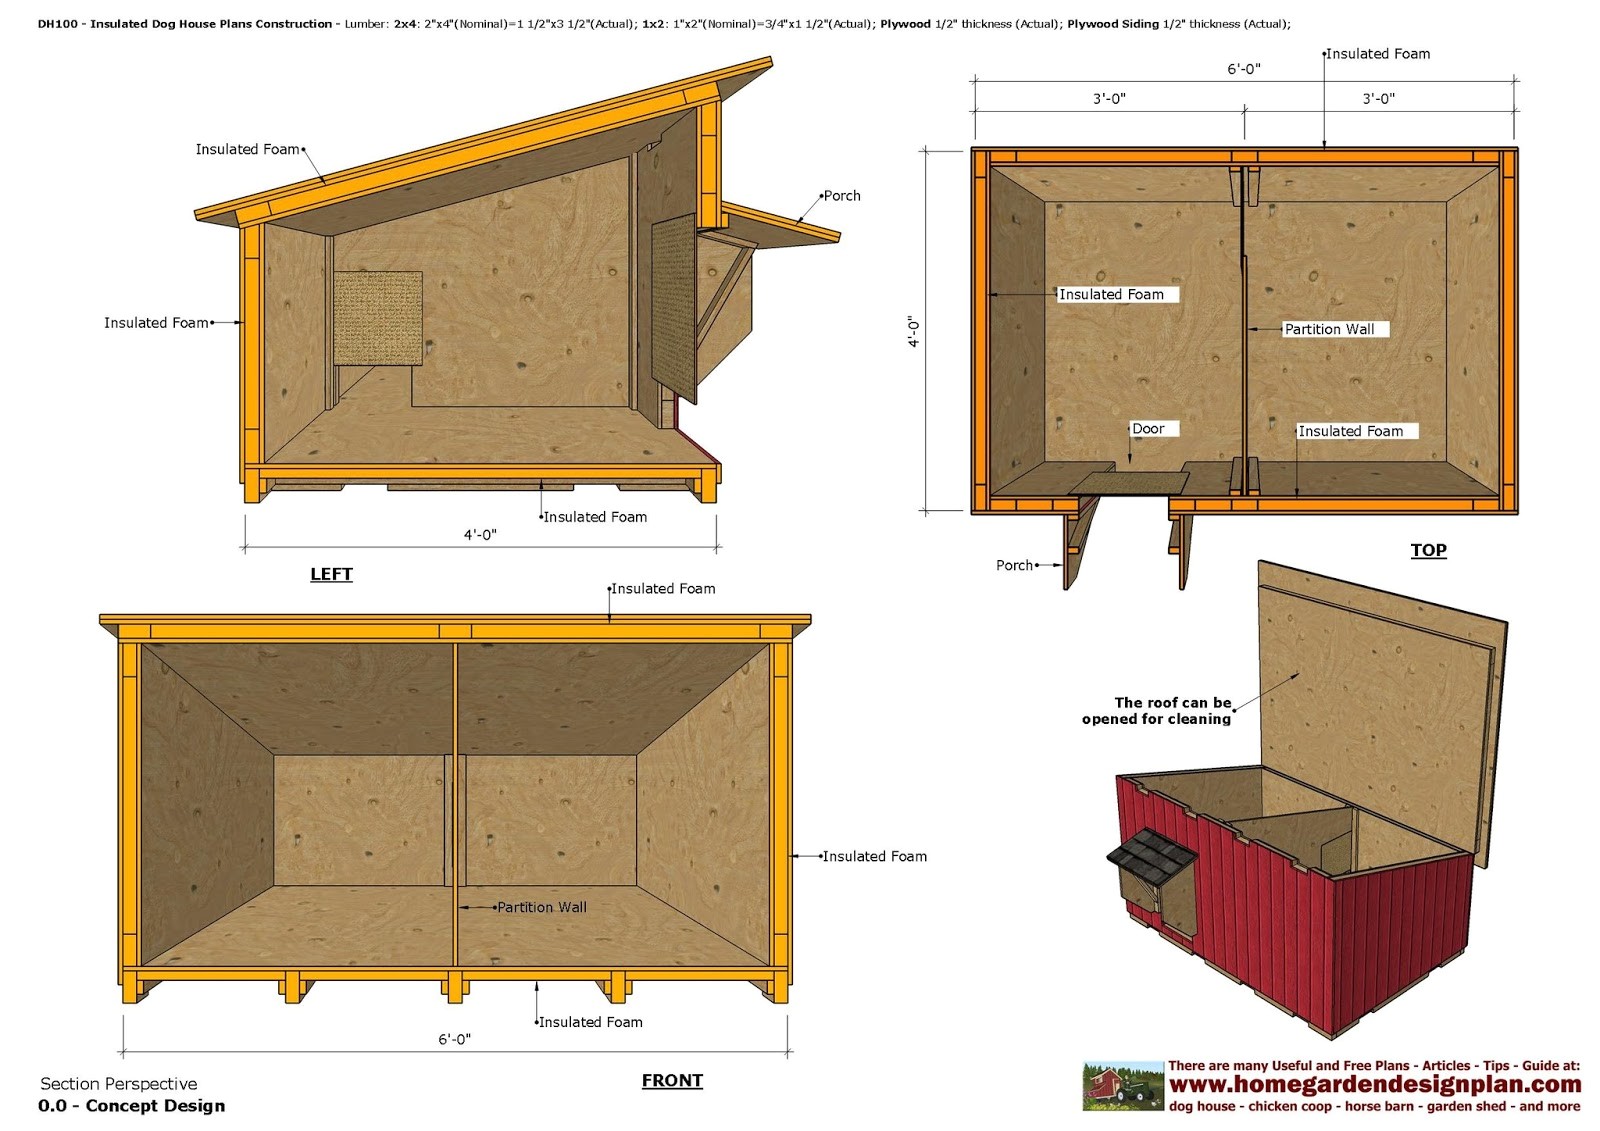 dh100 insulated dog house plans dog